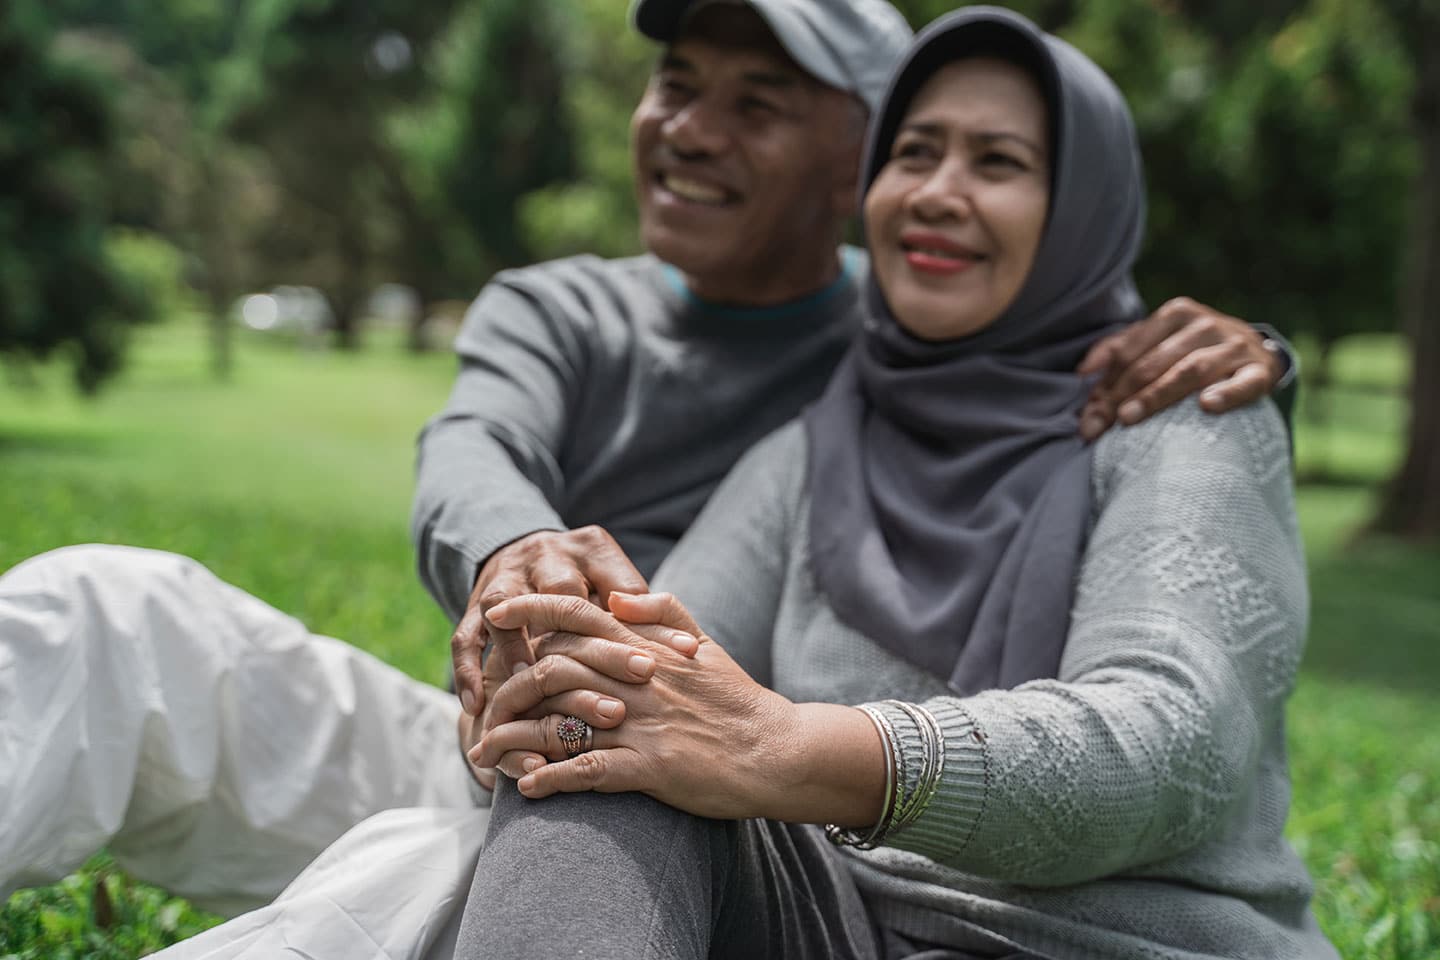 An older Arabic couple sitting in a park spending time together